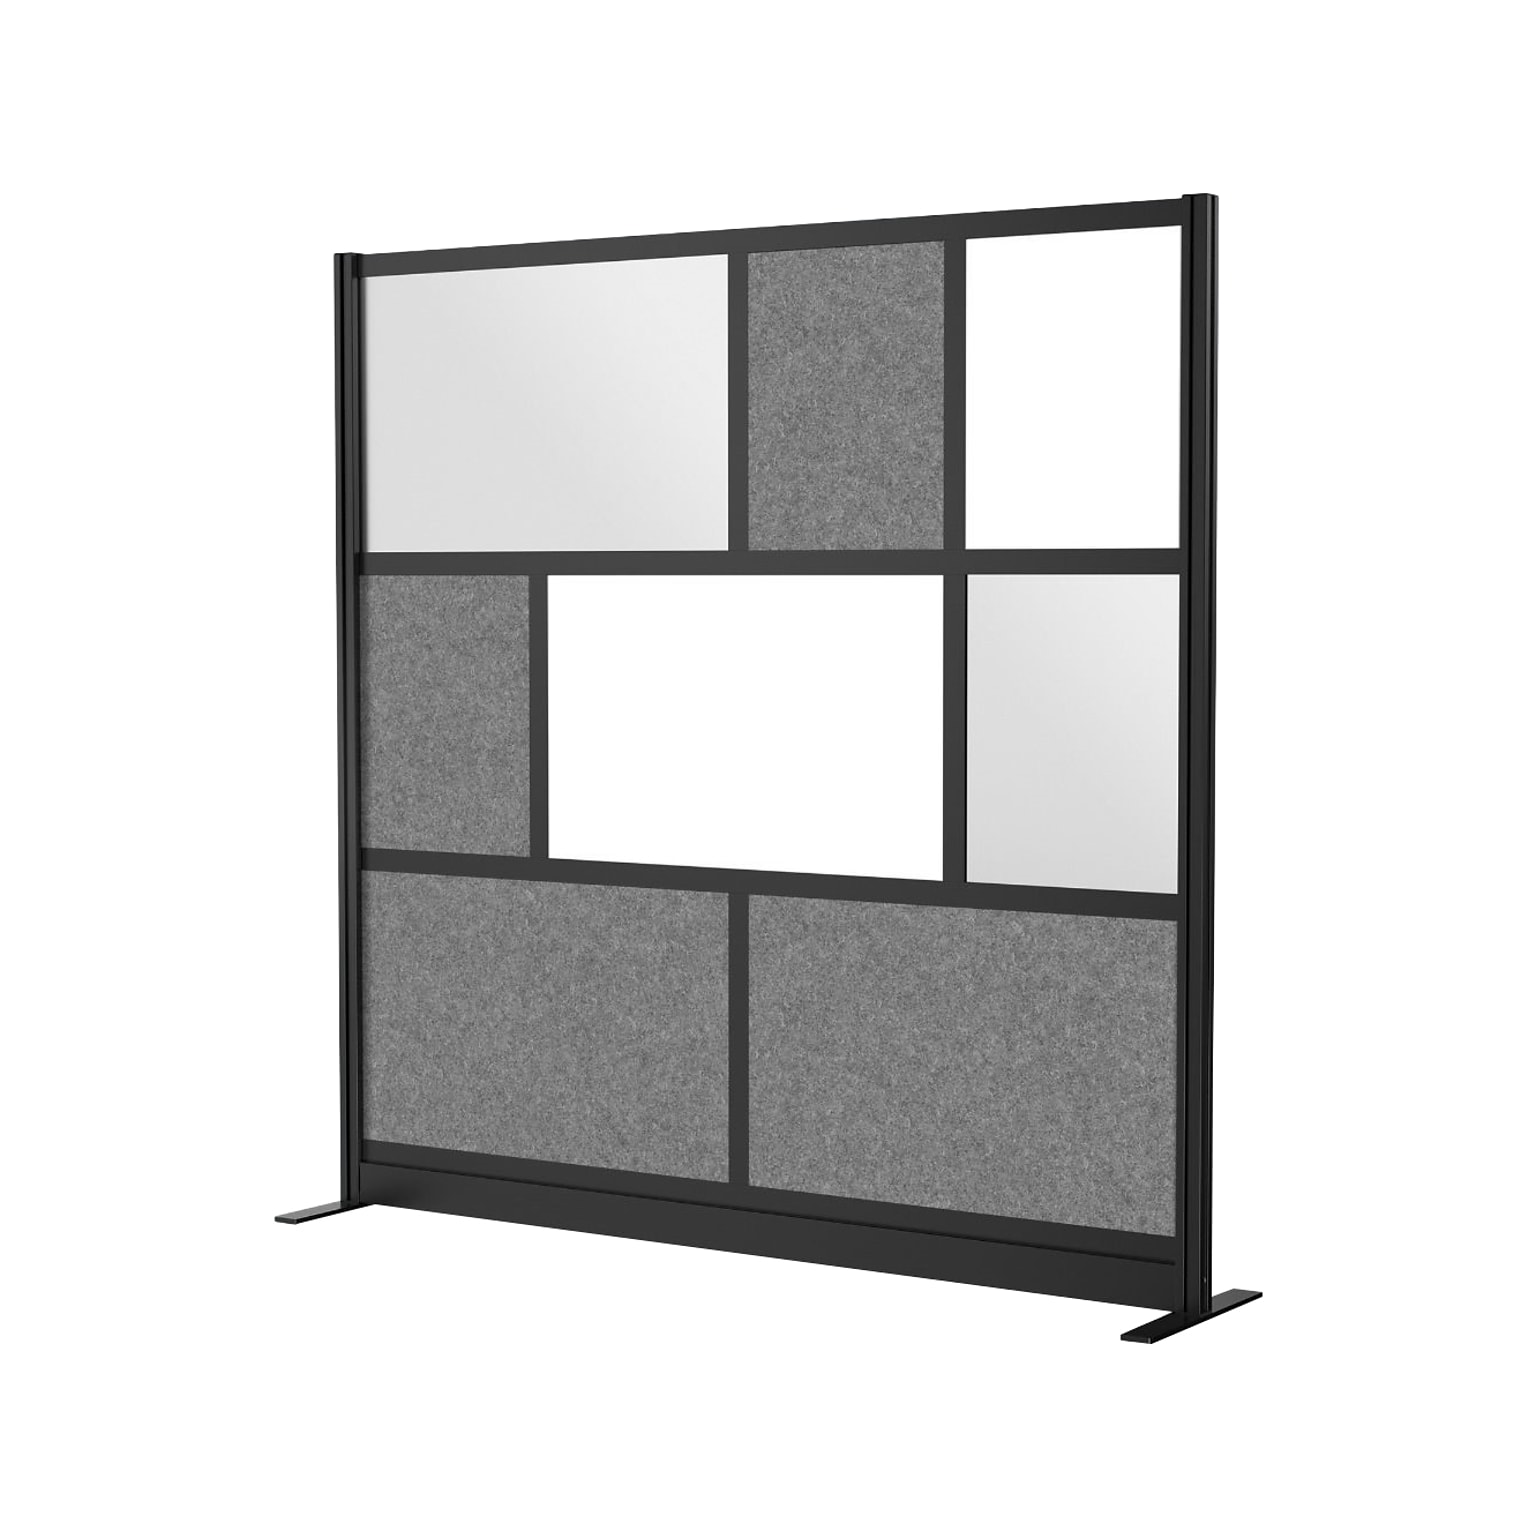 Luxor Workflow Series 8-Panel Freestanding Room Divider System Starter Wall with Whiteboard, 70H x 70W, Black/Gray